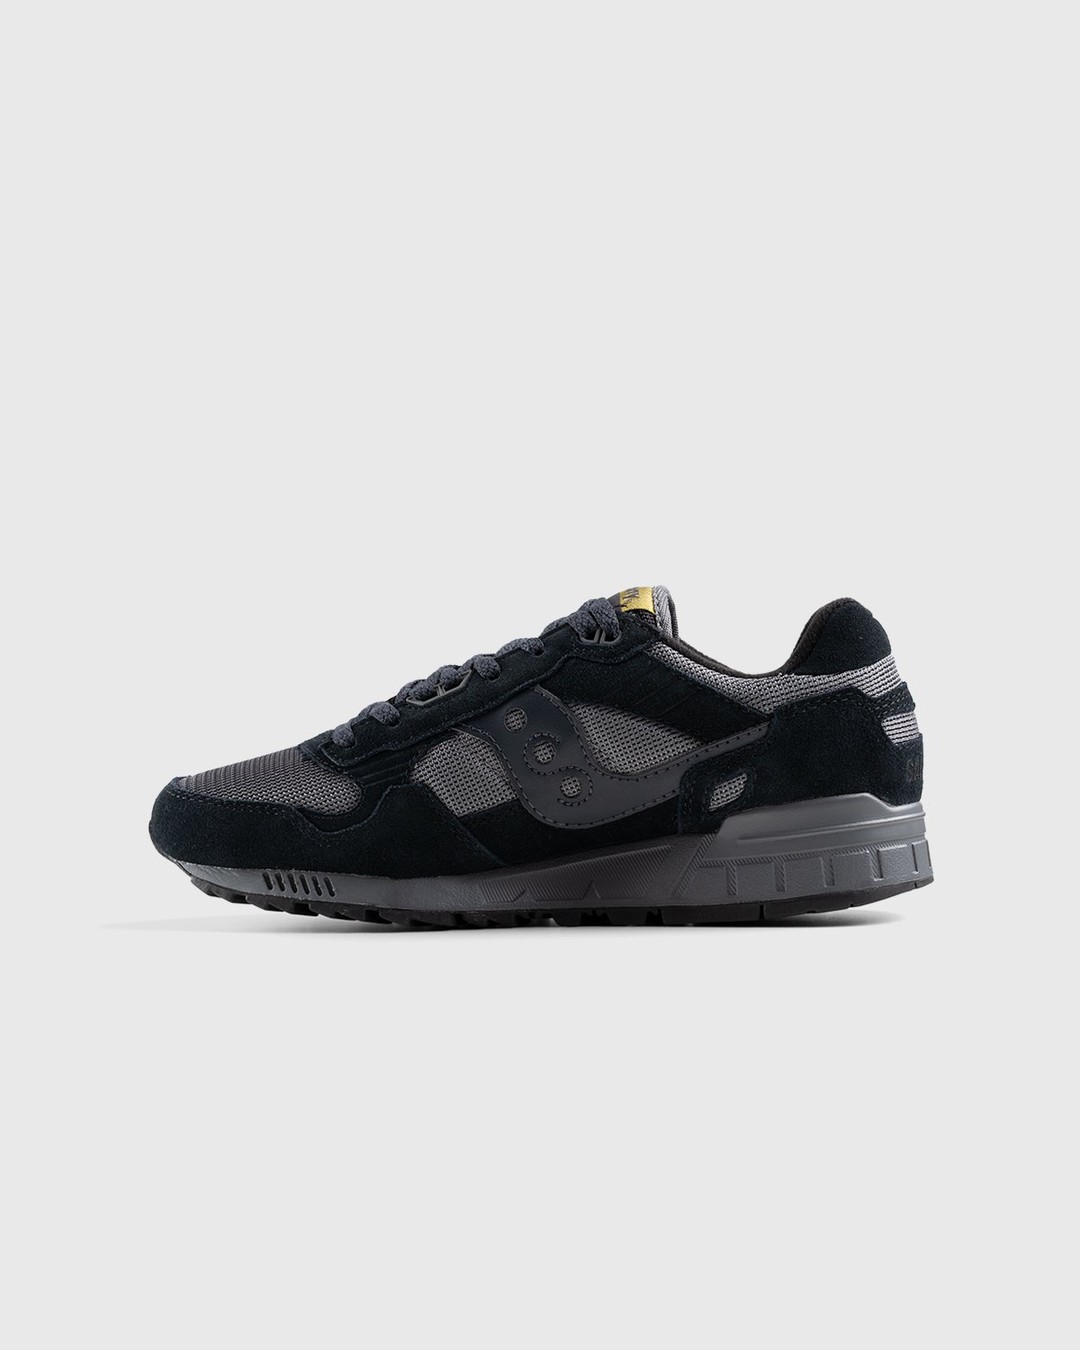 Saucony – Shadow 5000 Limo - Low Top Sneakers - Black - Image 2